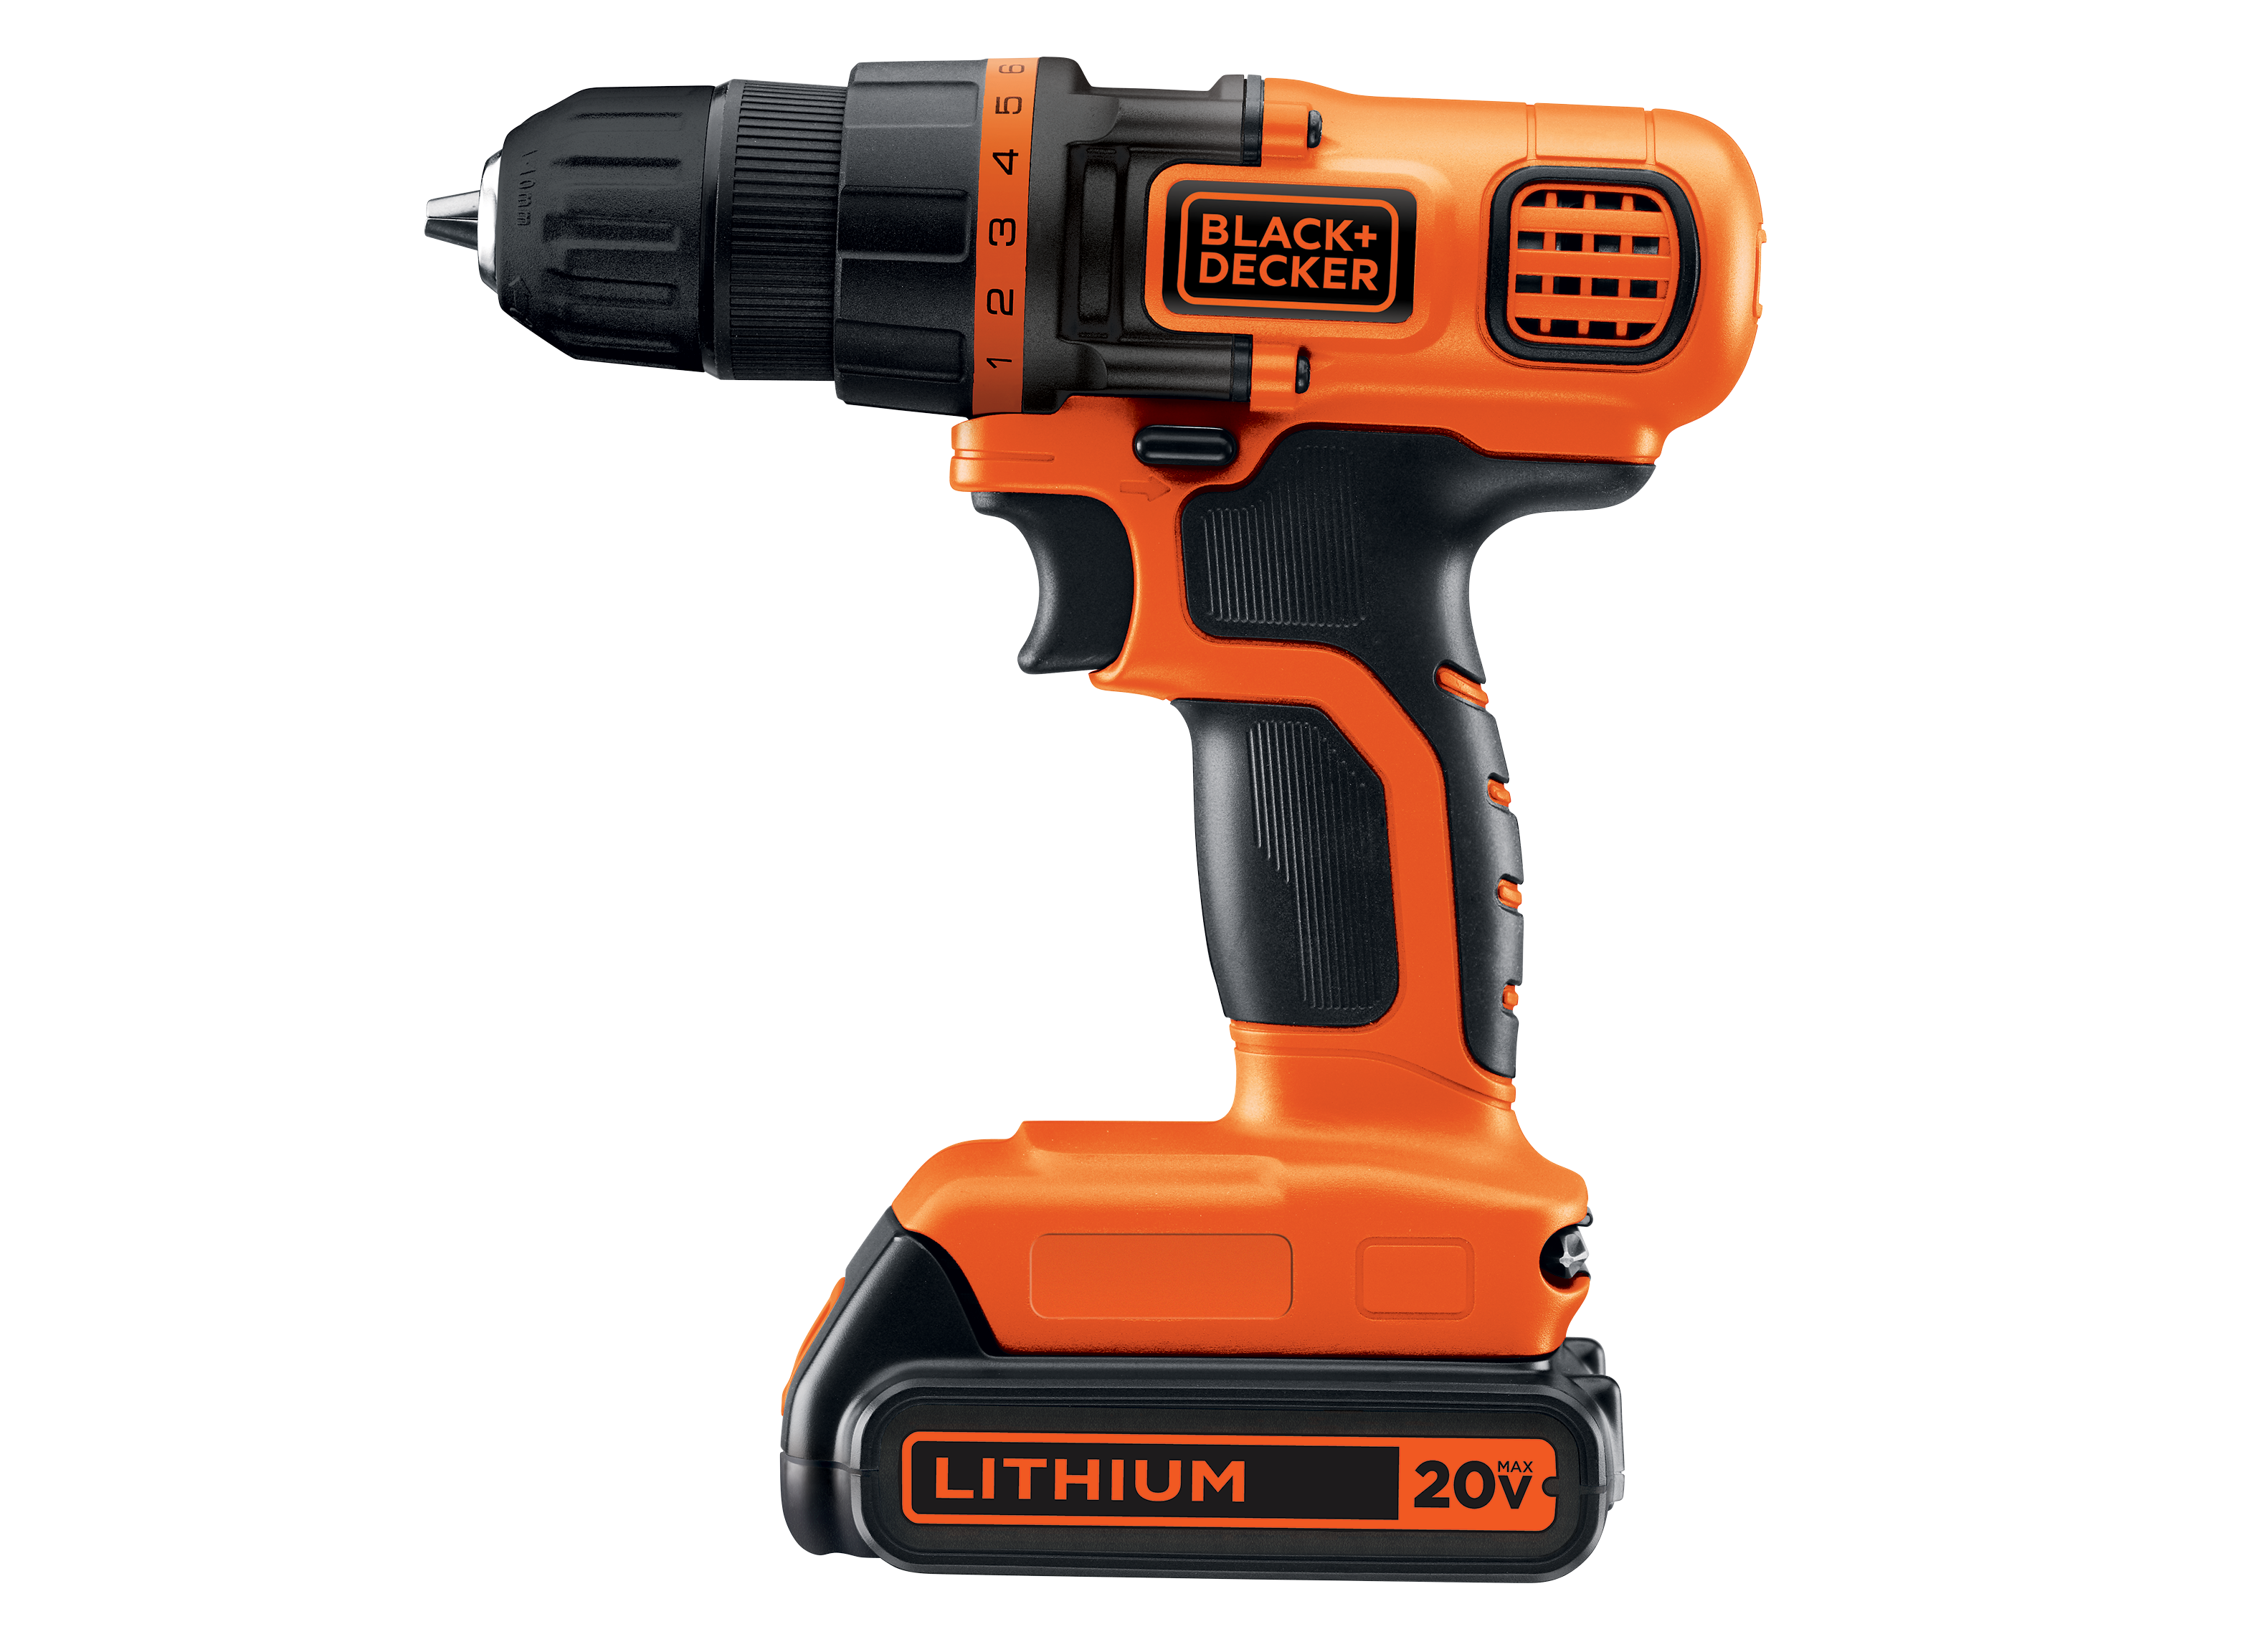 https://crdms.images.consumerreports.org/prod/products/cr/models/400292-heavy-duty-typically-18-to-20-volts-black-decker-ldx120c-10009927.png